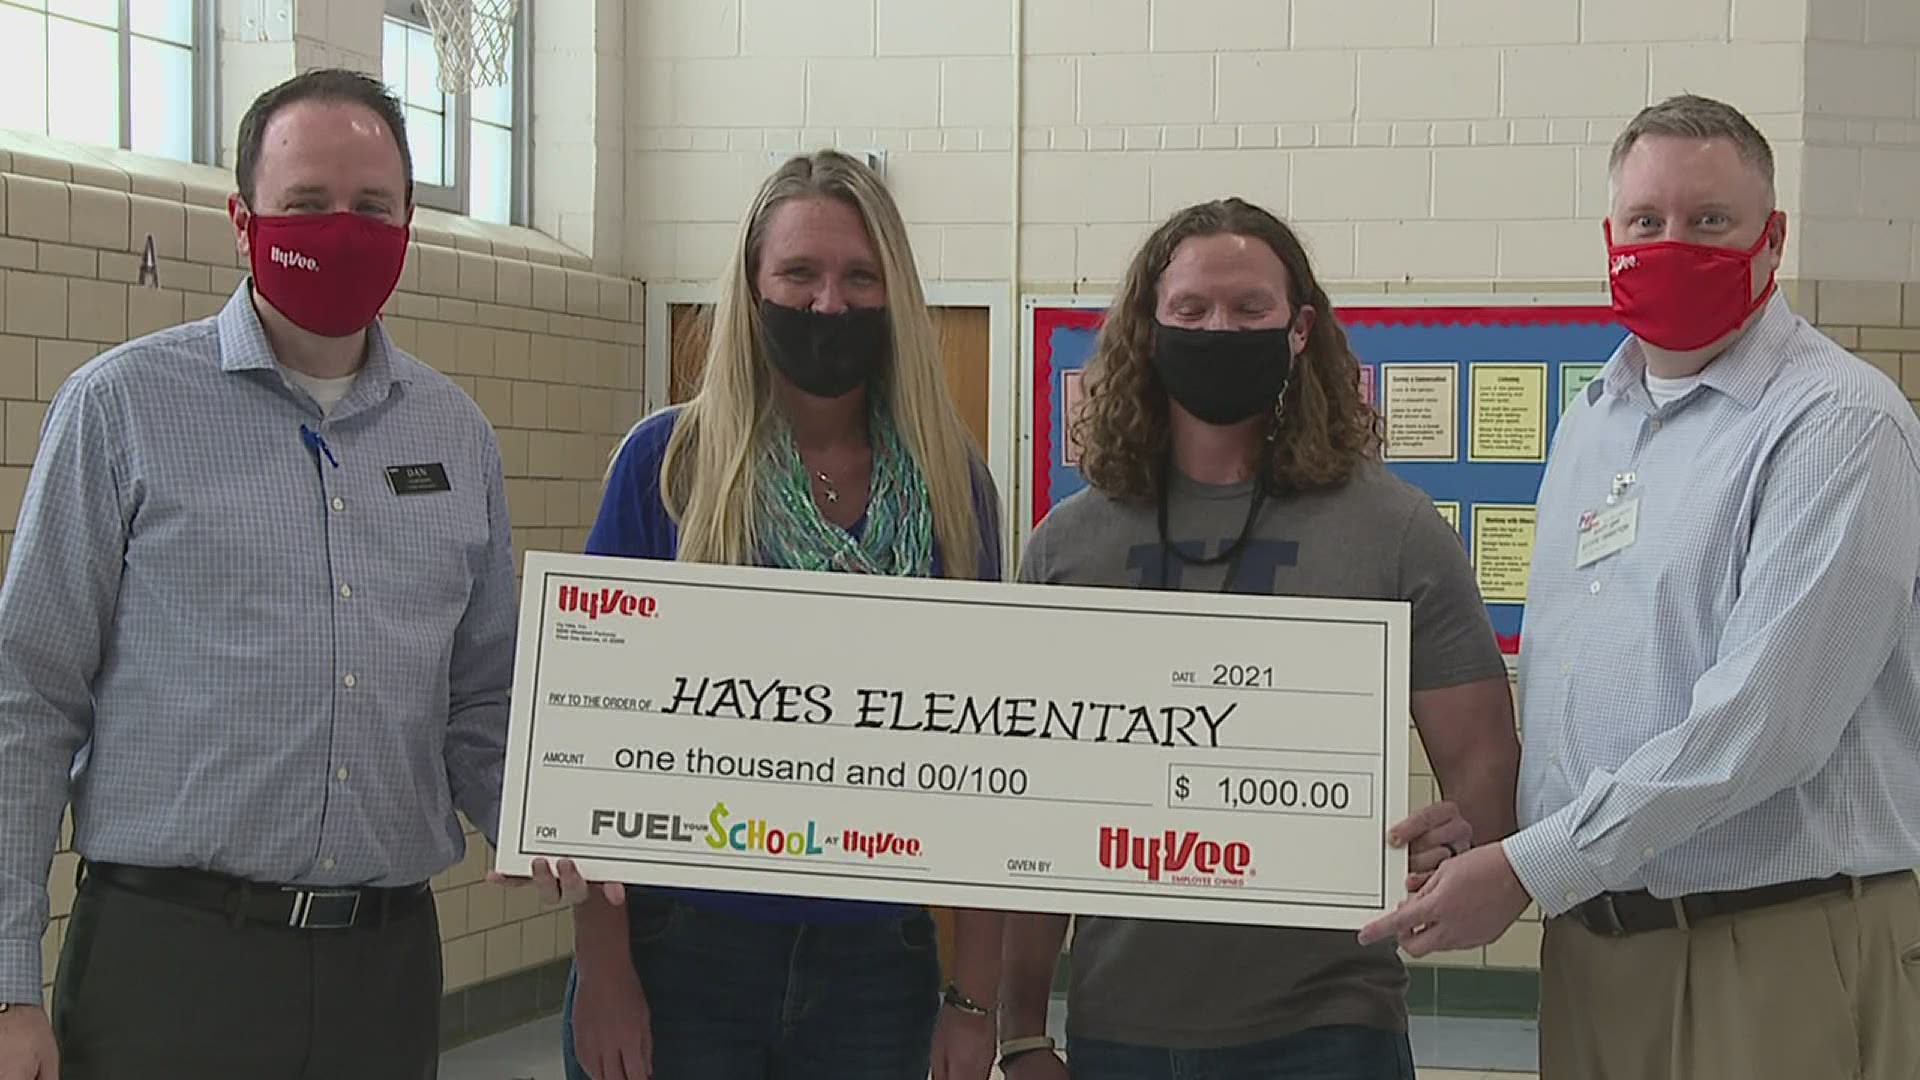 The principal said the $1,000 grant will help incentivize getting kids back into the classroom.